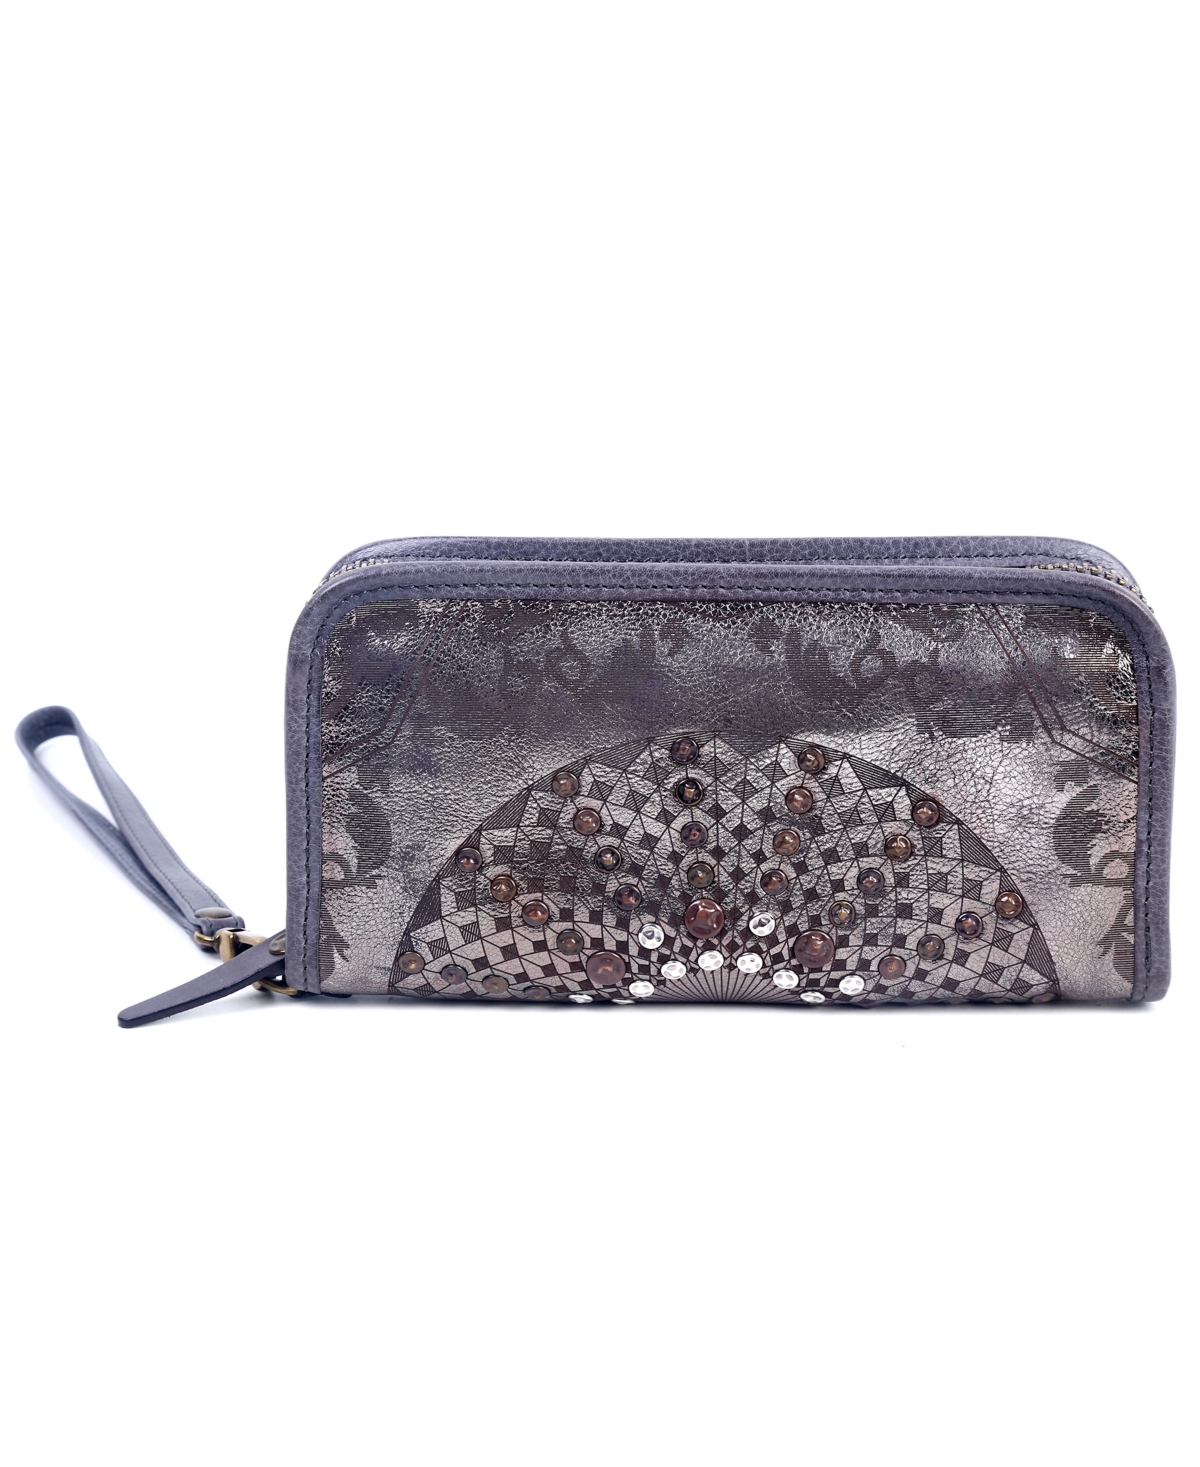 Mola Leather Clutch - Gold